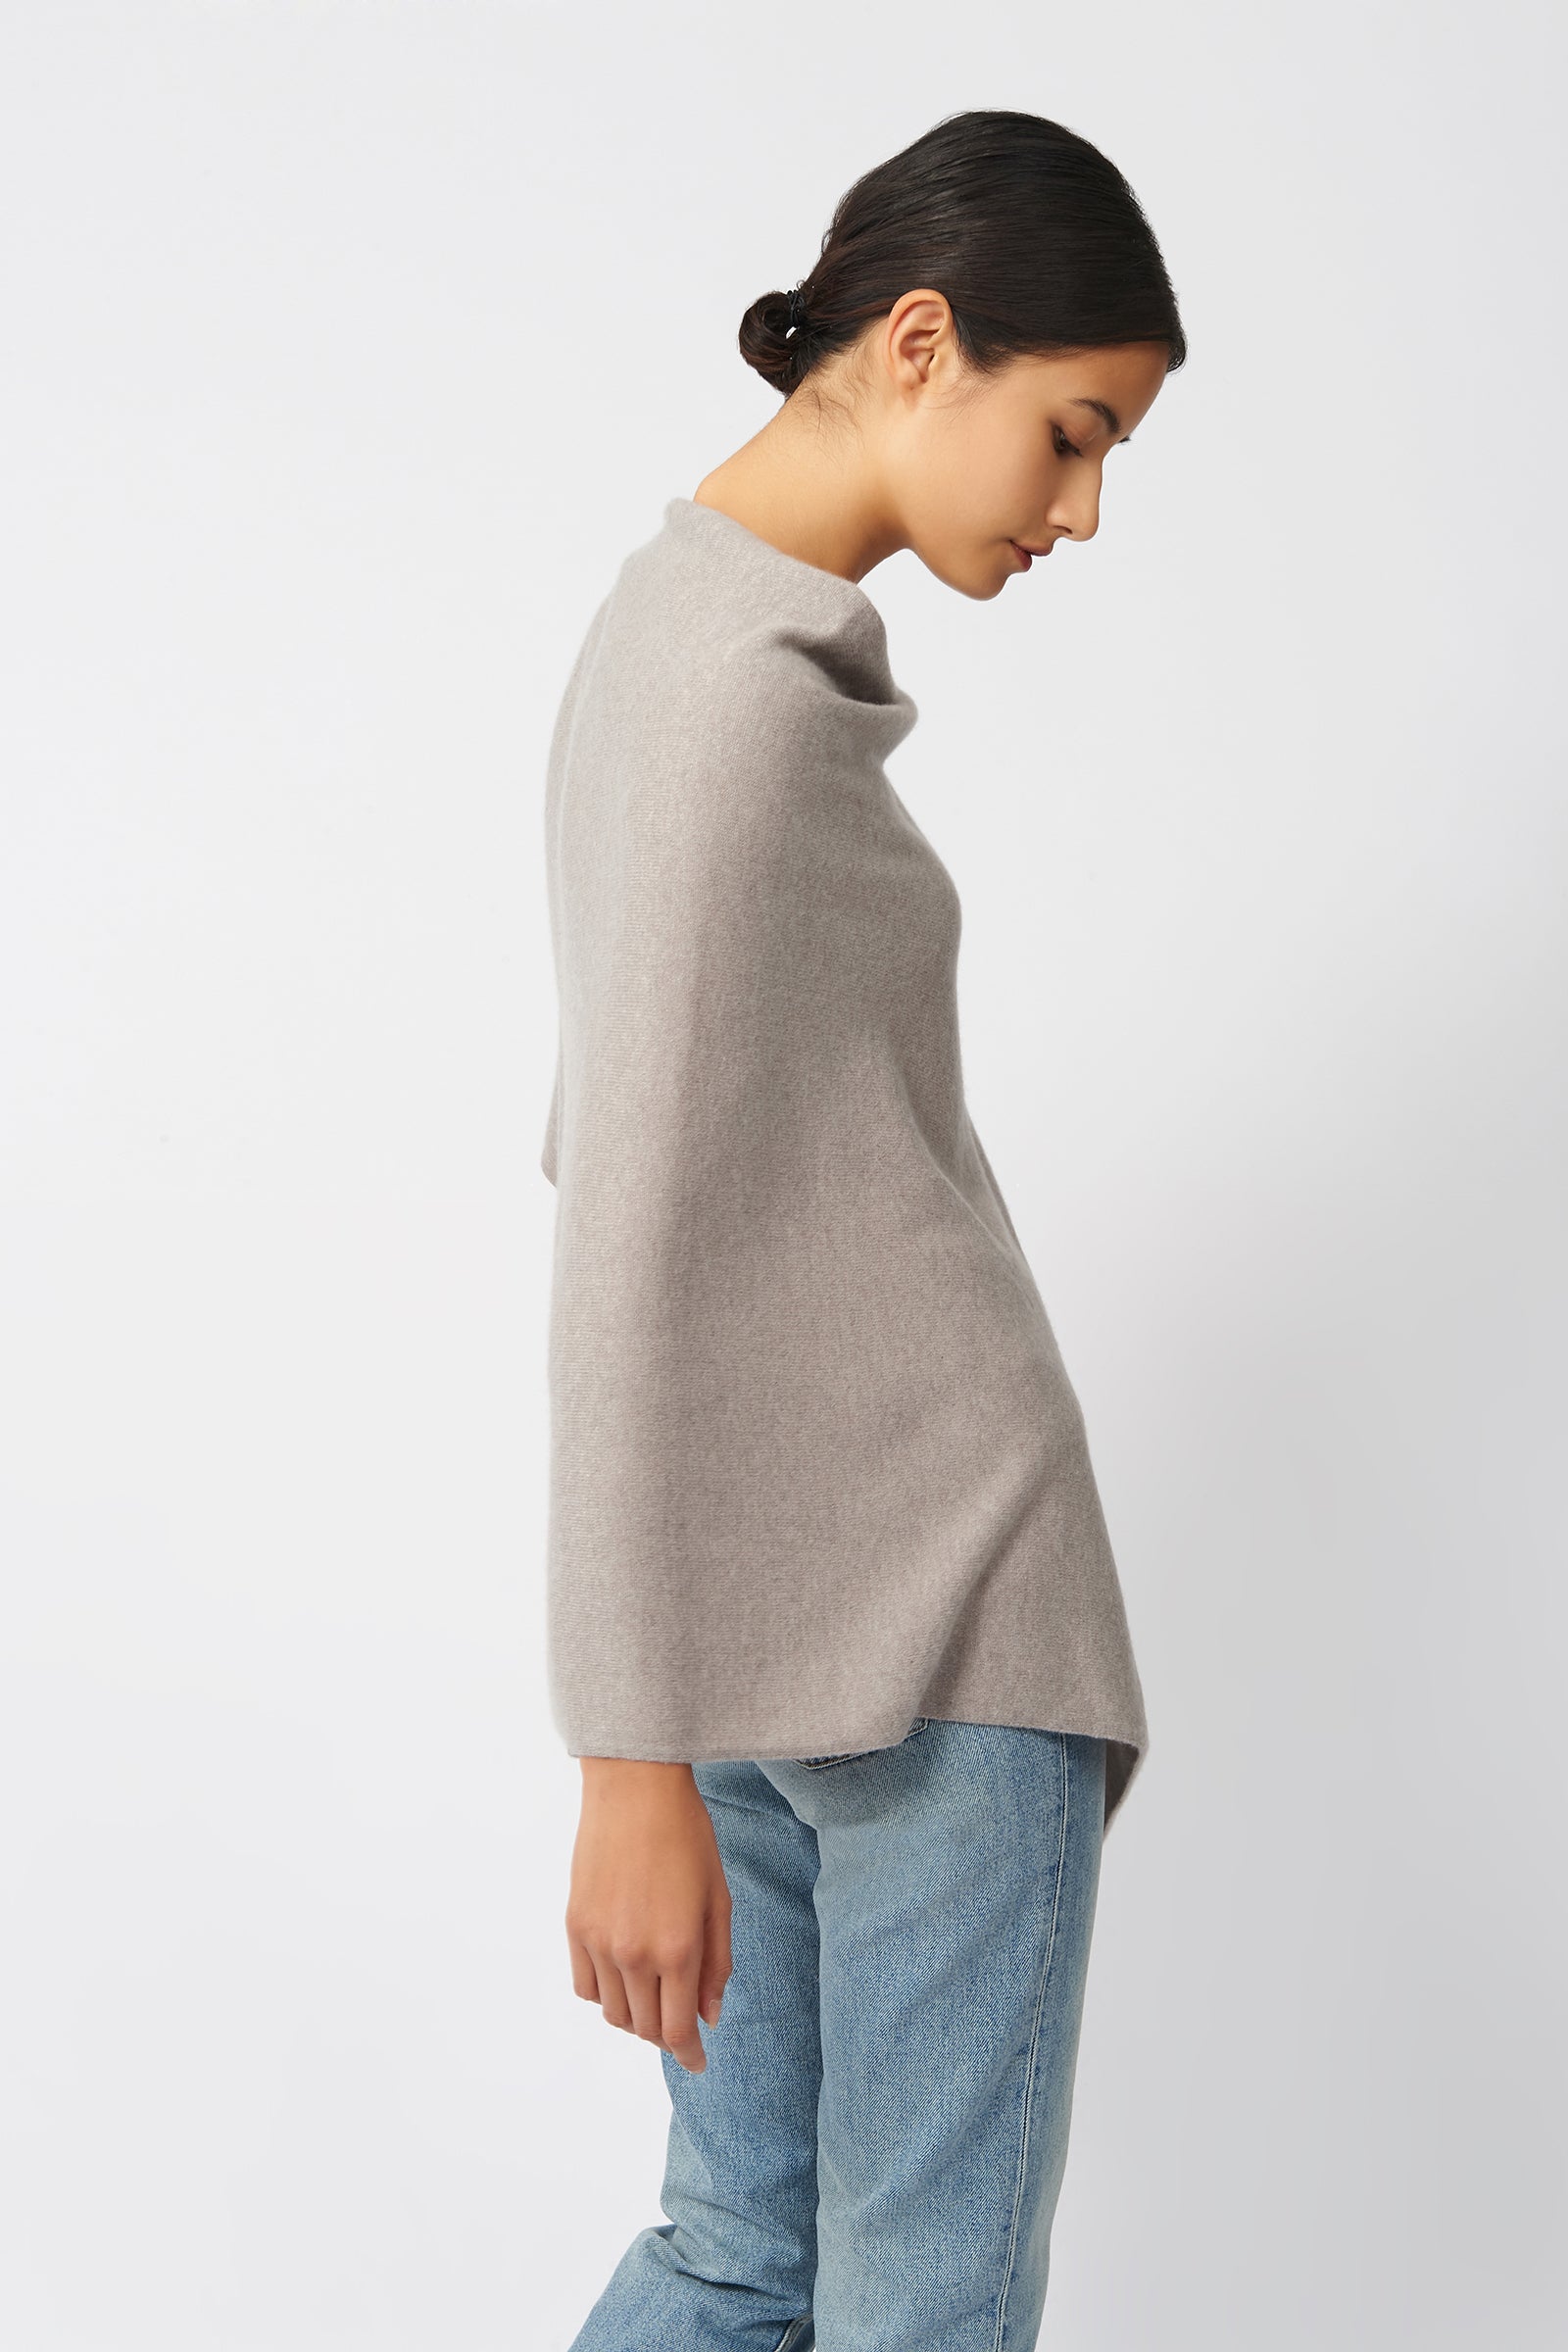 Kal Rieman Cashmere Poncho in Drift on Model Side View